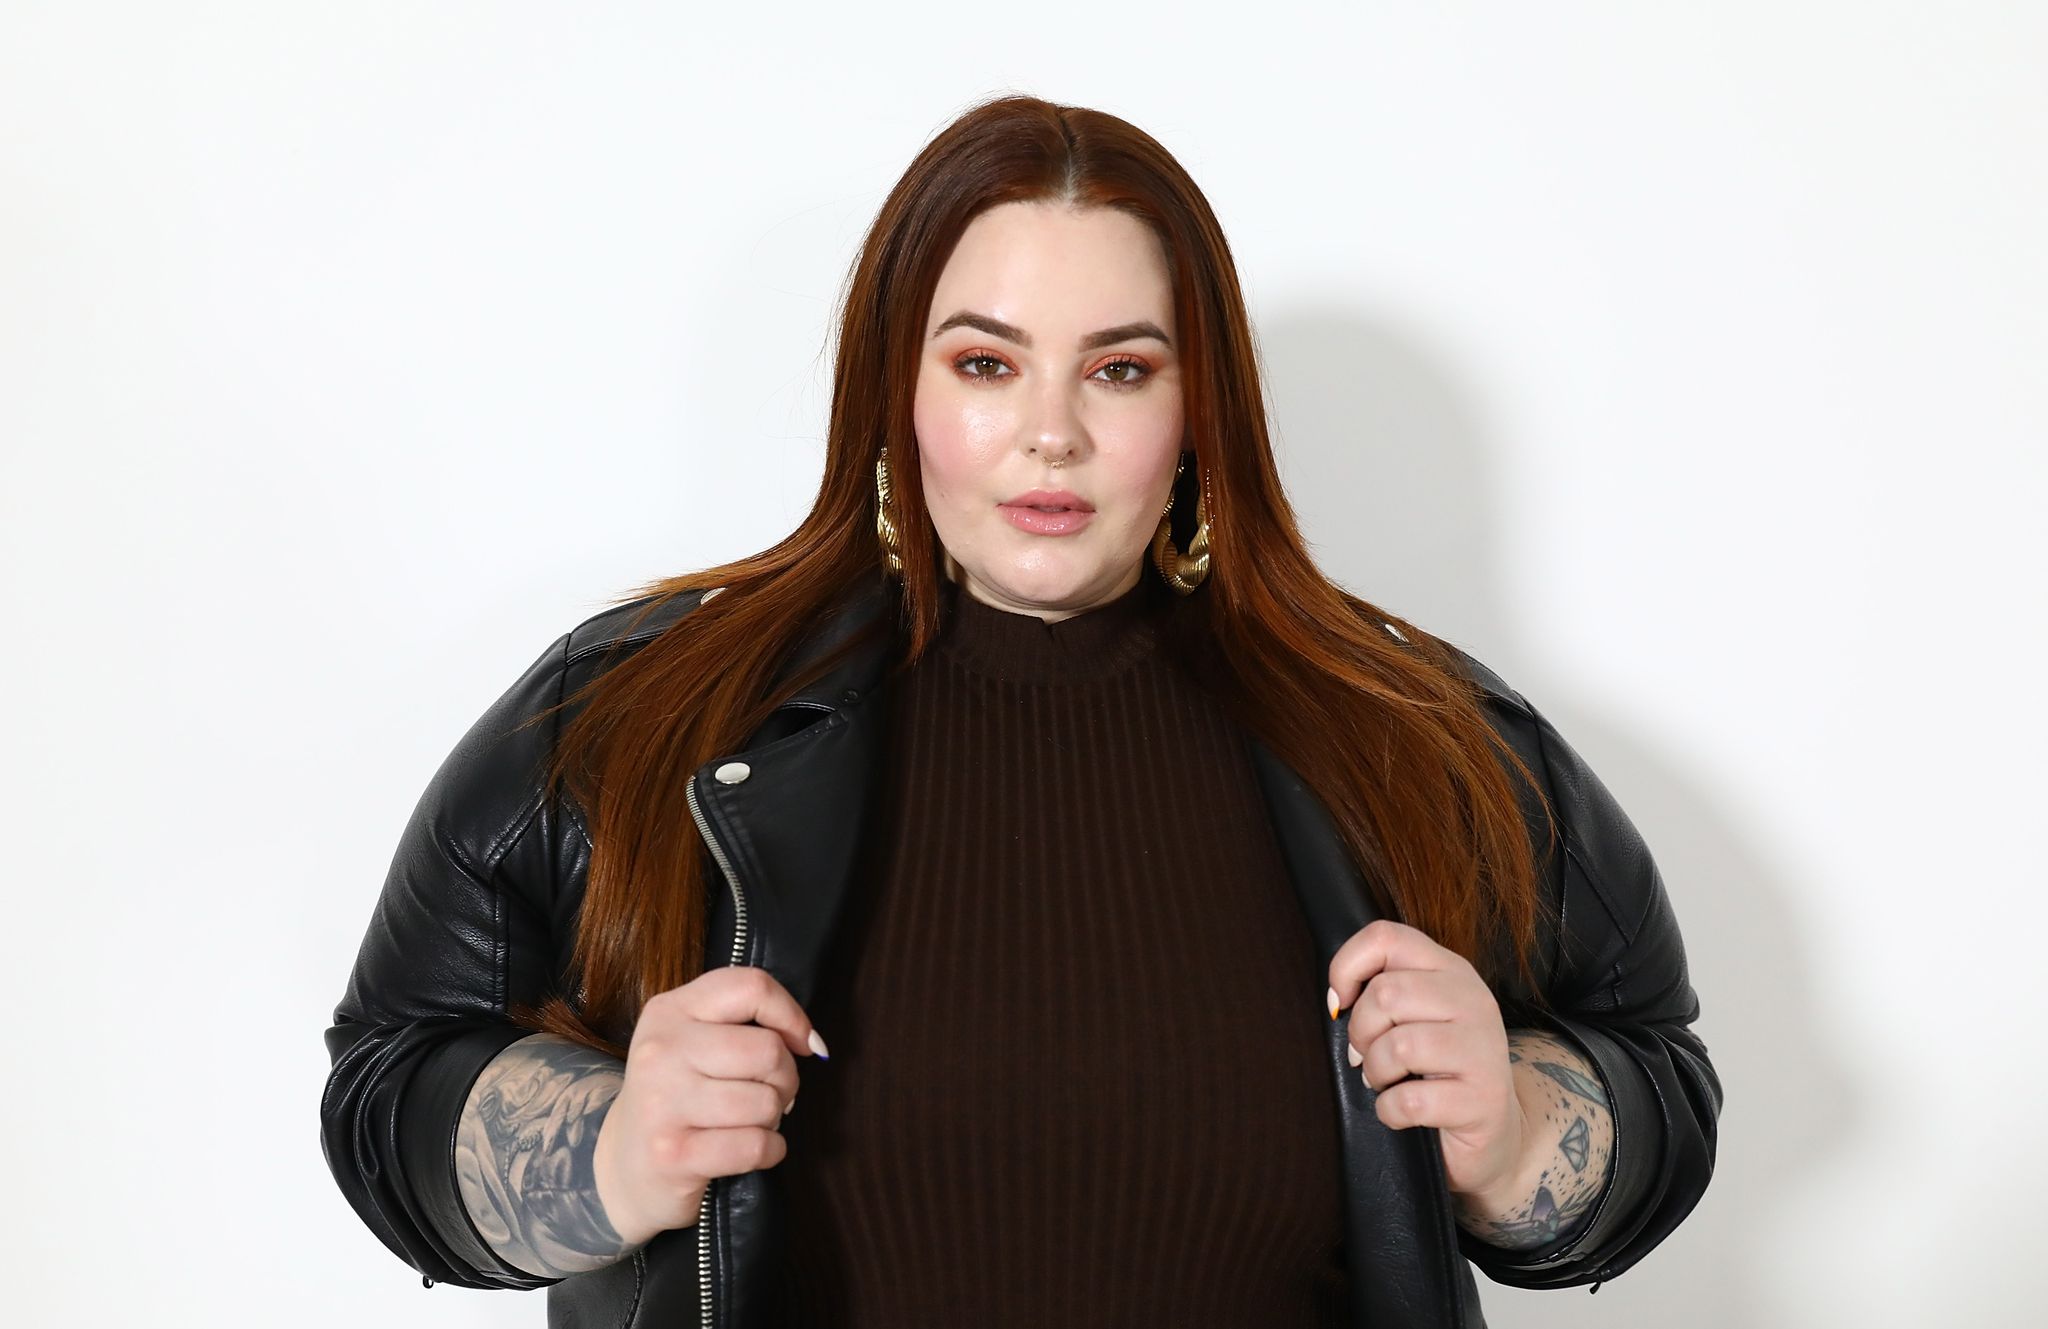 https://hips.hearstapps.com/hmg-prod/images/tess-holliday-poses-for-a-photograph-after-a-talk-on-body-news-photo-1568480446.jpg?crop=0.985xw:0.954xh;0.0119xw,0.0457xh&resize=2048:*